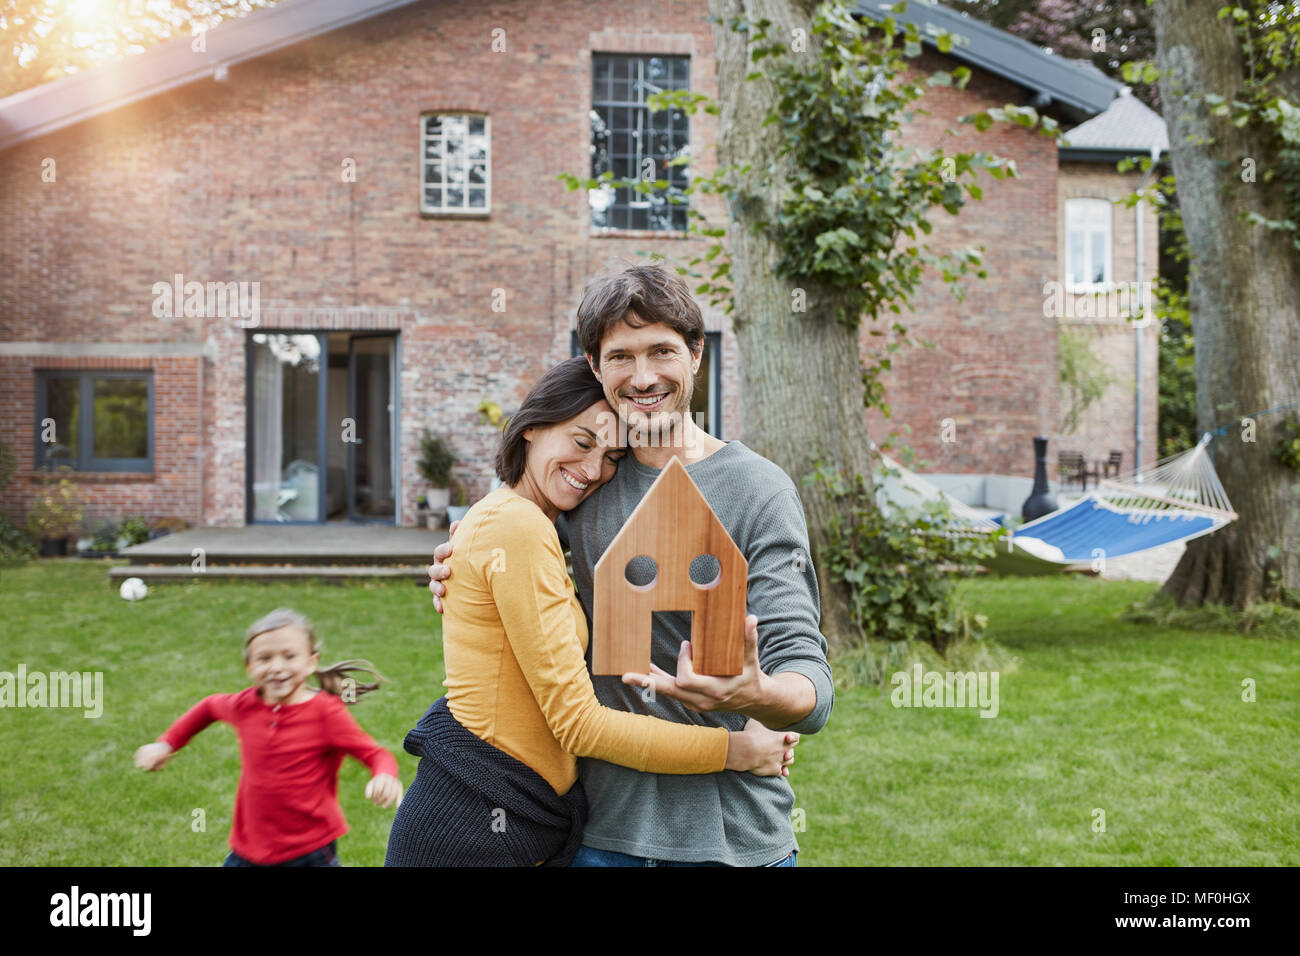 Portrait of smiling couple with daughter in garden of their home holding house model Stock Photo